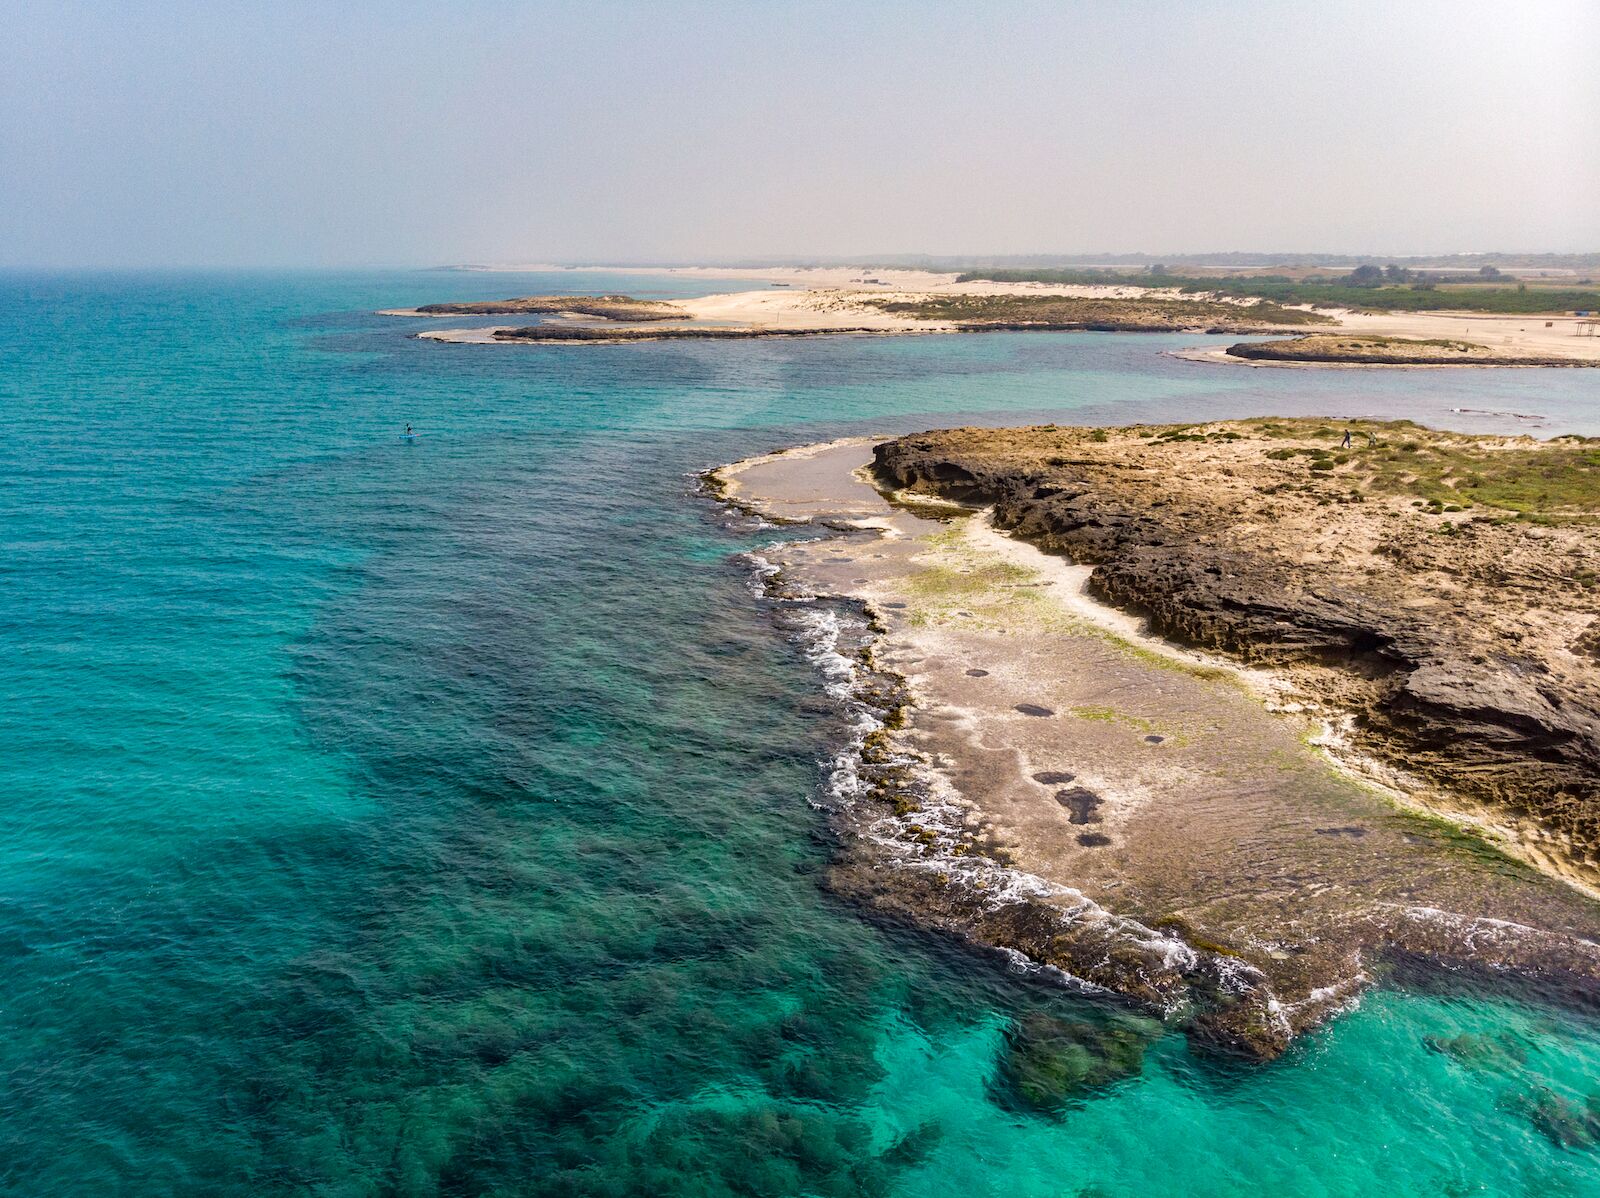 Coastline of the Mediterranean Sea. Dor  Beach Nature Reserve. Israel. View from the drone.